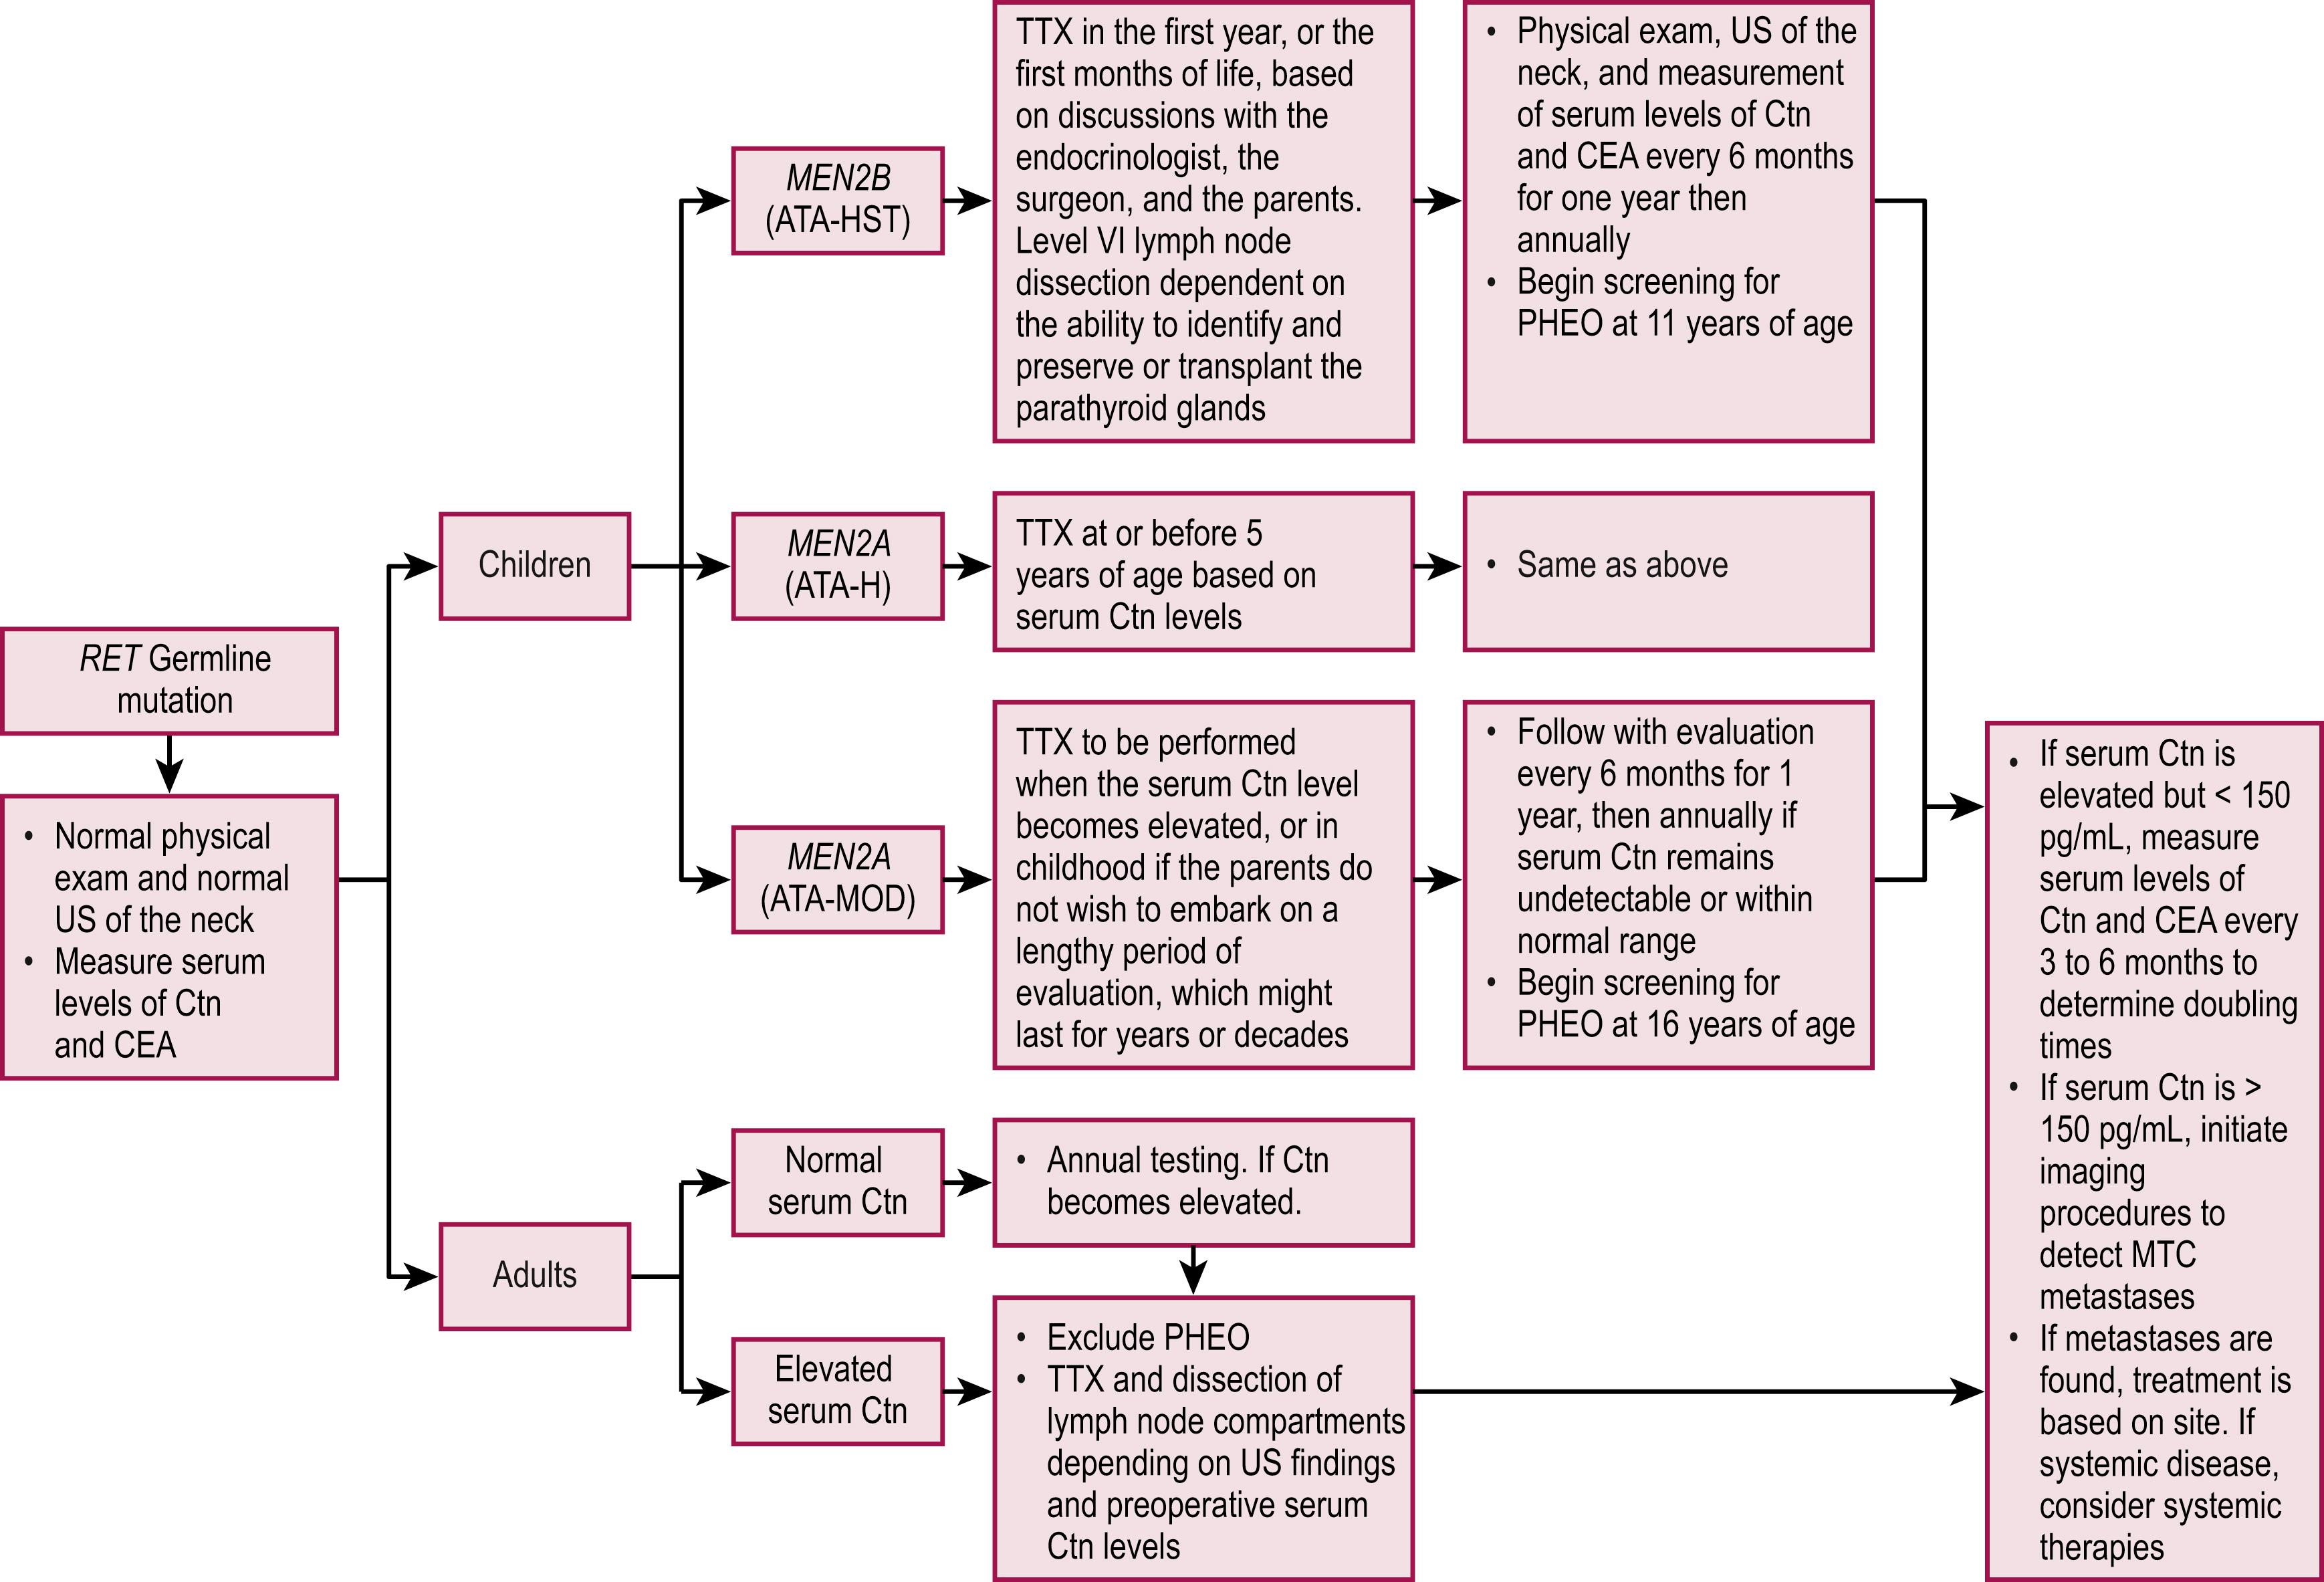 Fig. 75.6, The management of patients with RET germline mutation detected on genetic screening is depicted. 85 ATA, American Thyroid Association risk categories for aggressive medullary thyroid cancer (MTC) (HST, highest risk, H, high risk, MOD, moderate risk); Ctn, calcitonin; CEA, carcinoembryonic antigen, HPTH, hyperparathyroidism; PHEO, pheochromocytoma; RET , REarranged during Transfection; TTX, total thyroidectomy; US, ultrasound. (From Wells SA, Asa SL, Dralle H, et al. Revised American Thyroid Association guidelines for the management of medullary thyroid carcinoma. Thyroid. 2015;25:567–610. Used with the permission of Mary Ann Liebert, Inc. publishers.)